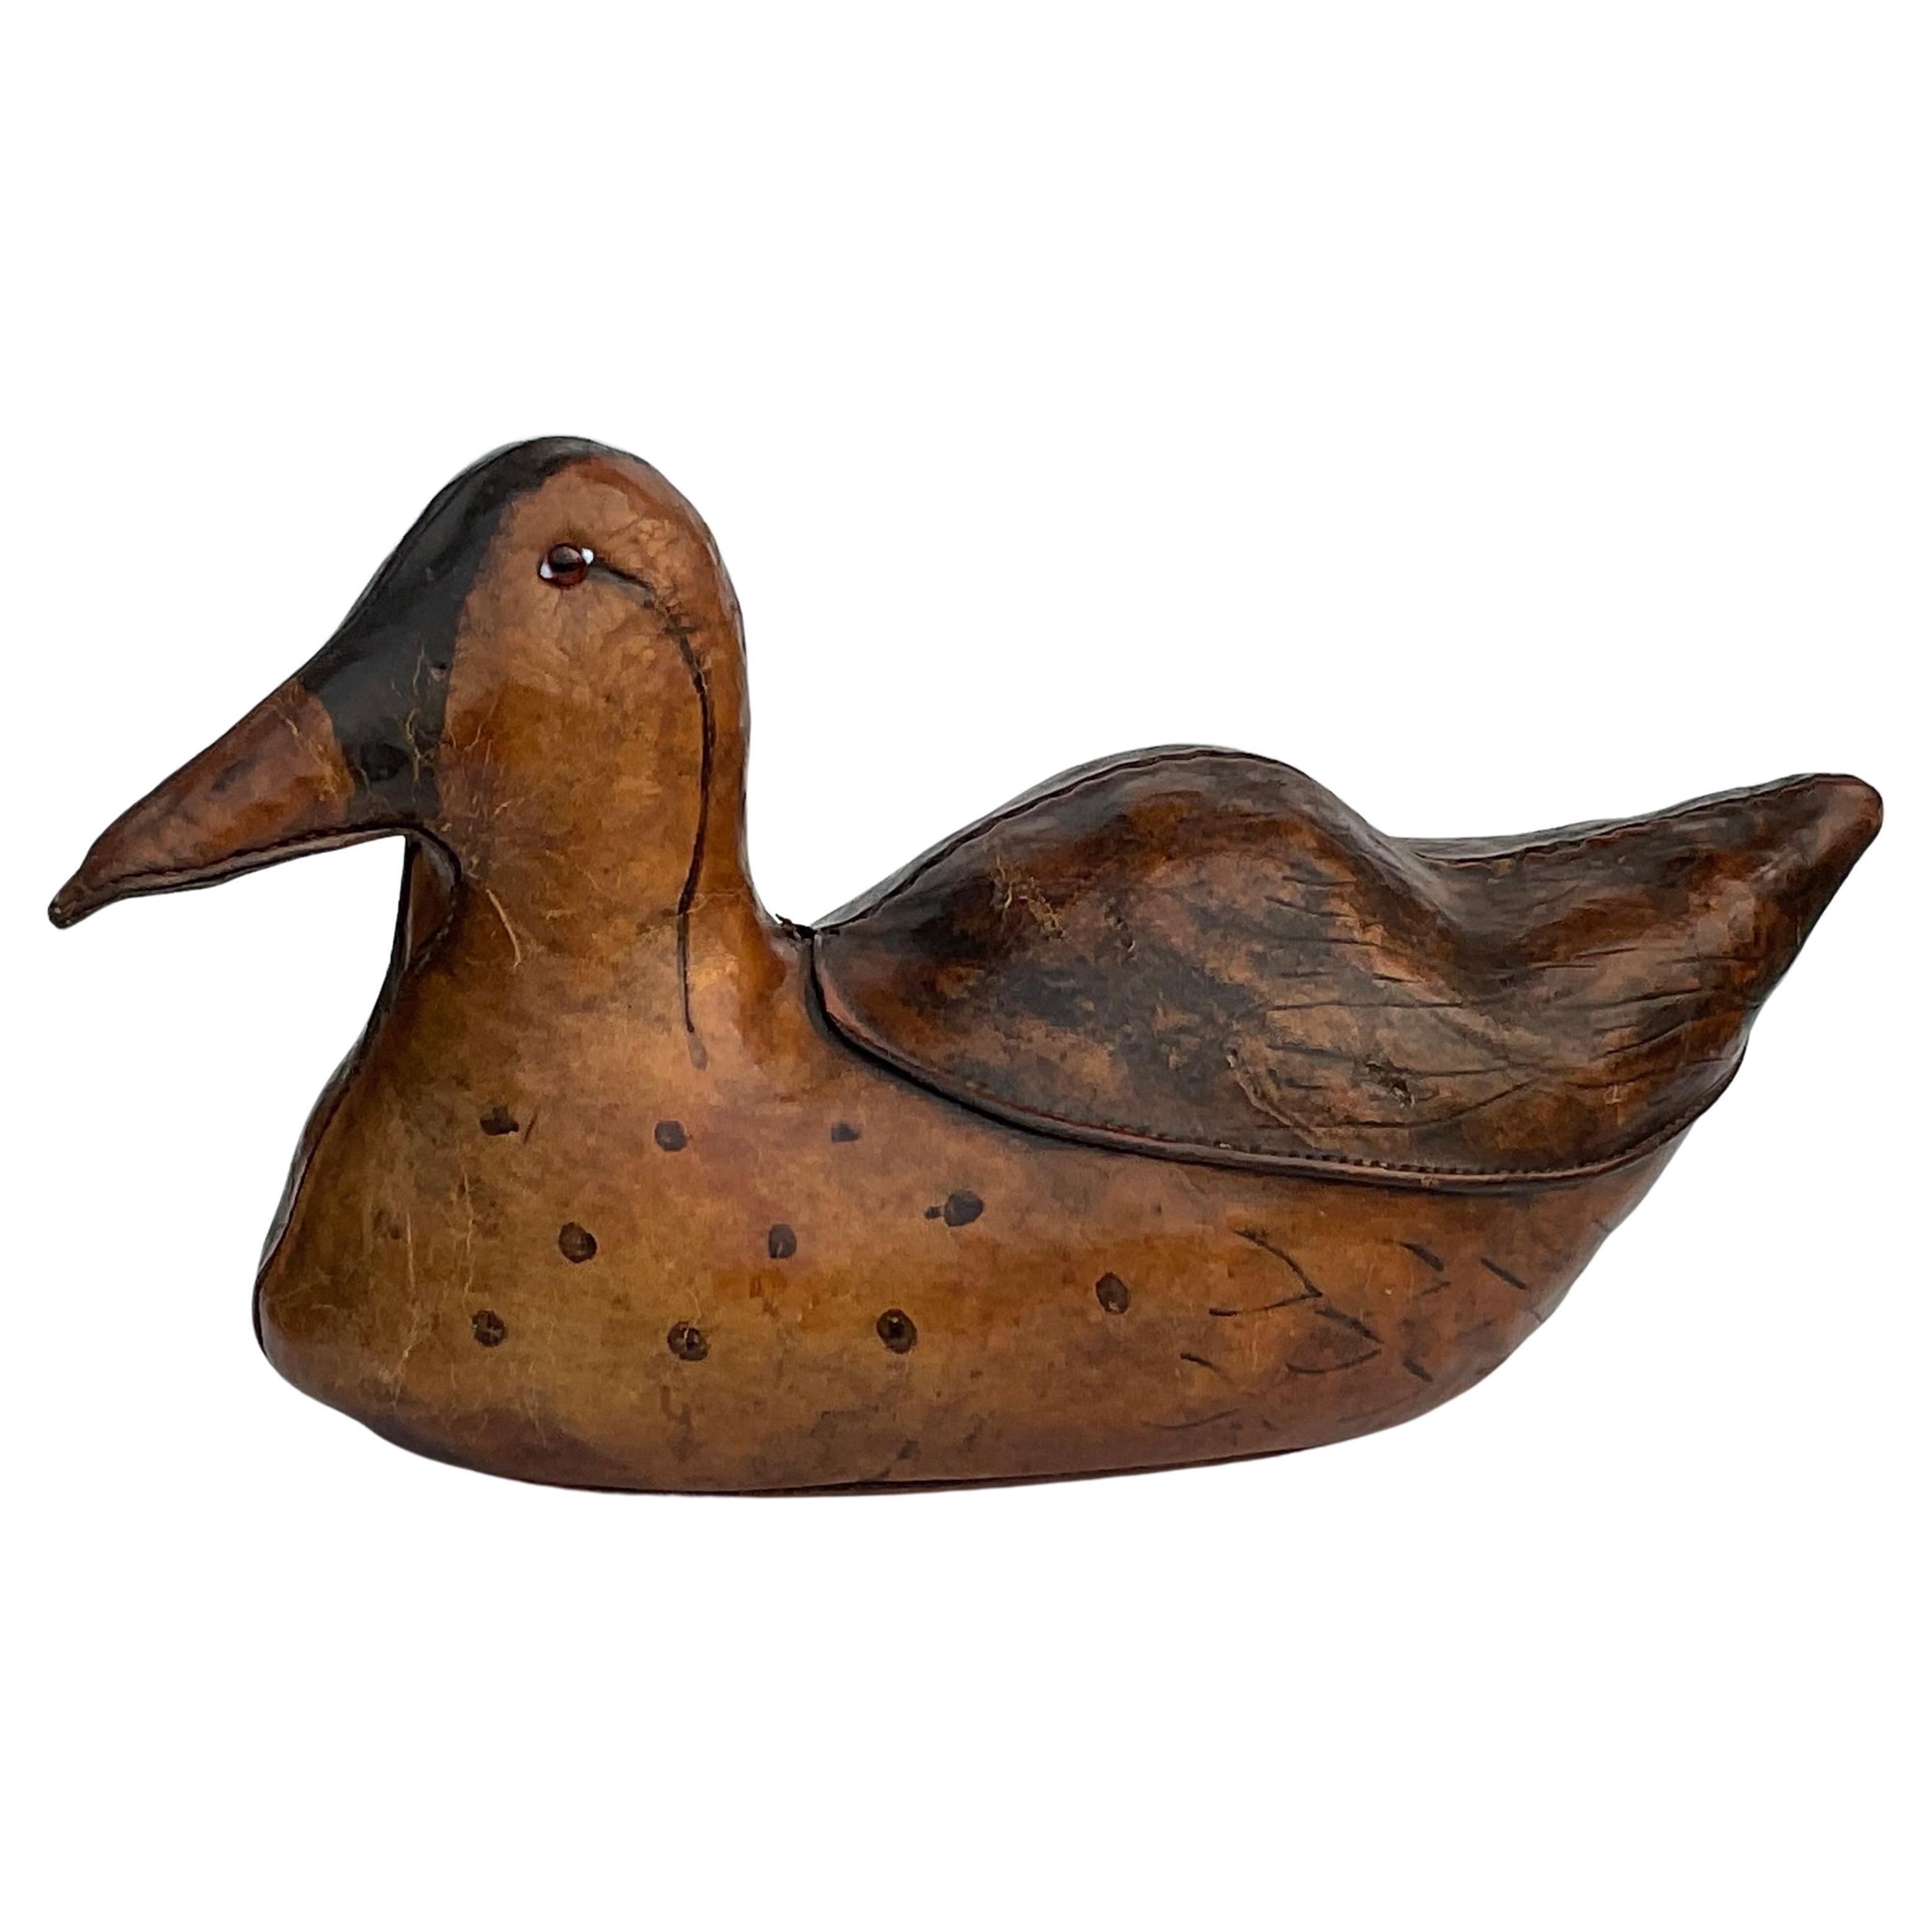 Vintage Leather Abercrombie and Fitch Duck Doorstop by Dimitri Omersa Circa 1950’s. Retains its original label and stamped as pictured. Extremely nice example. 